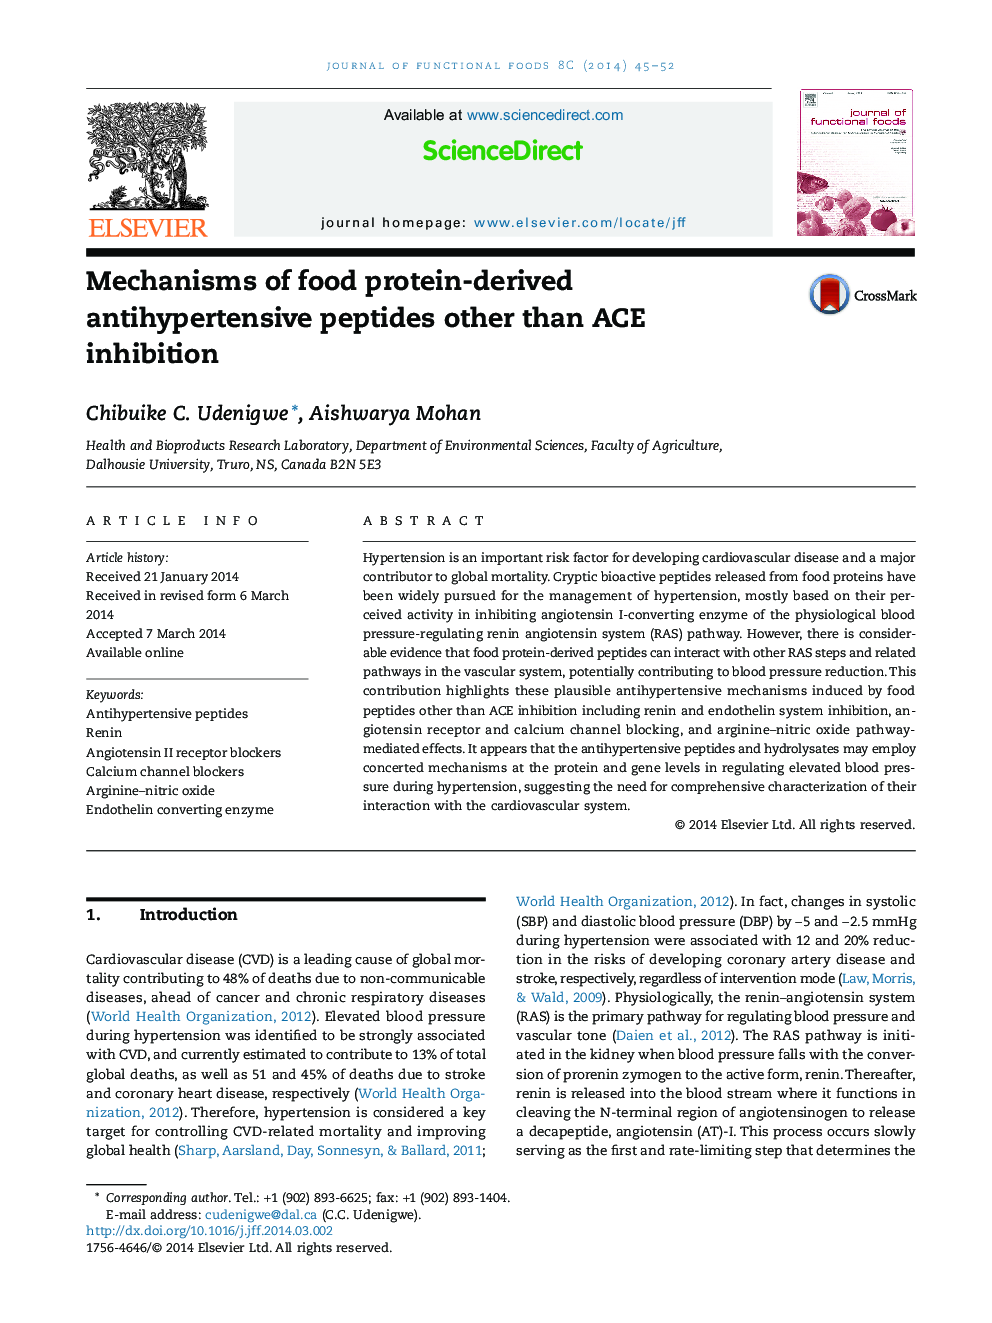 Mechanisms of food protein-derived antihypertensive peptides other than ACE inhibition